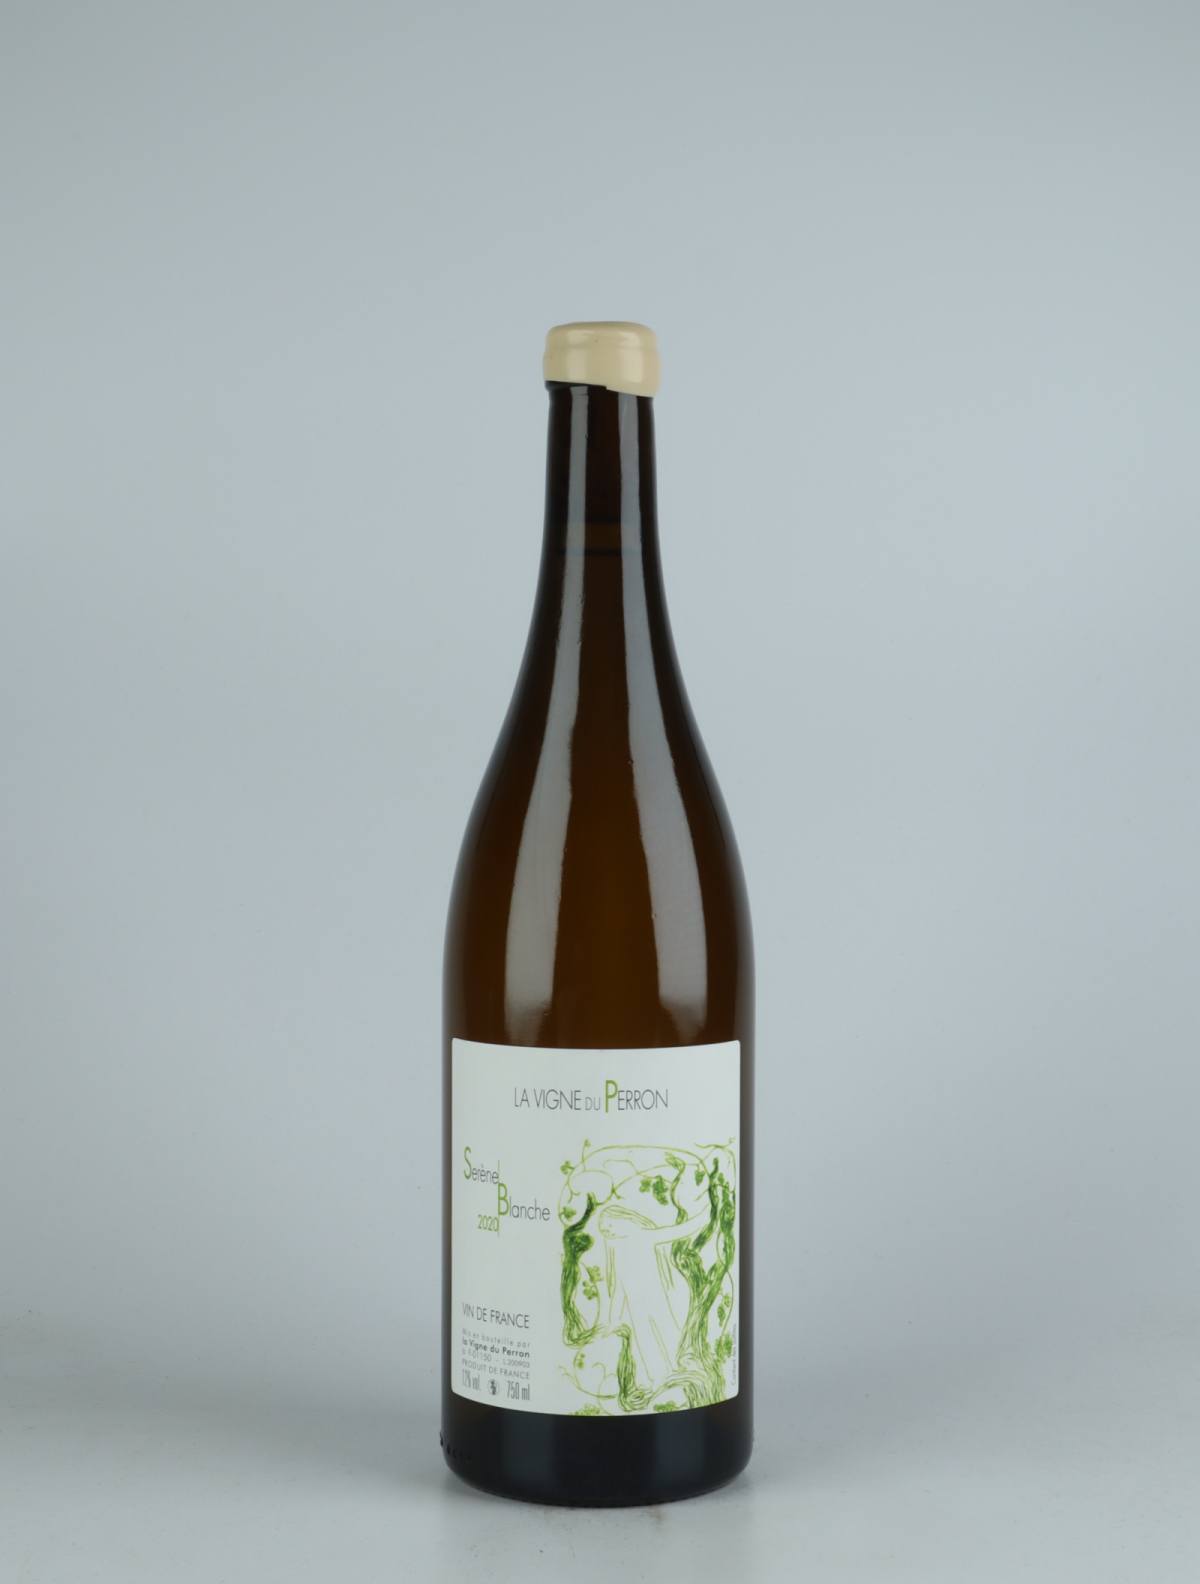 A bottle 2020 Sérène Blanche White wine from Domaine du Perron, Bugey in France